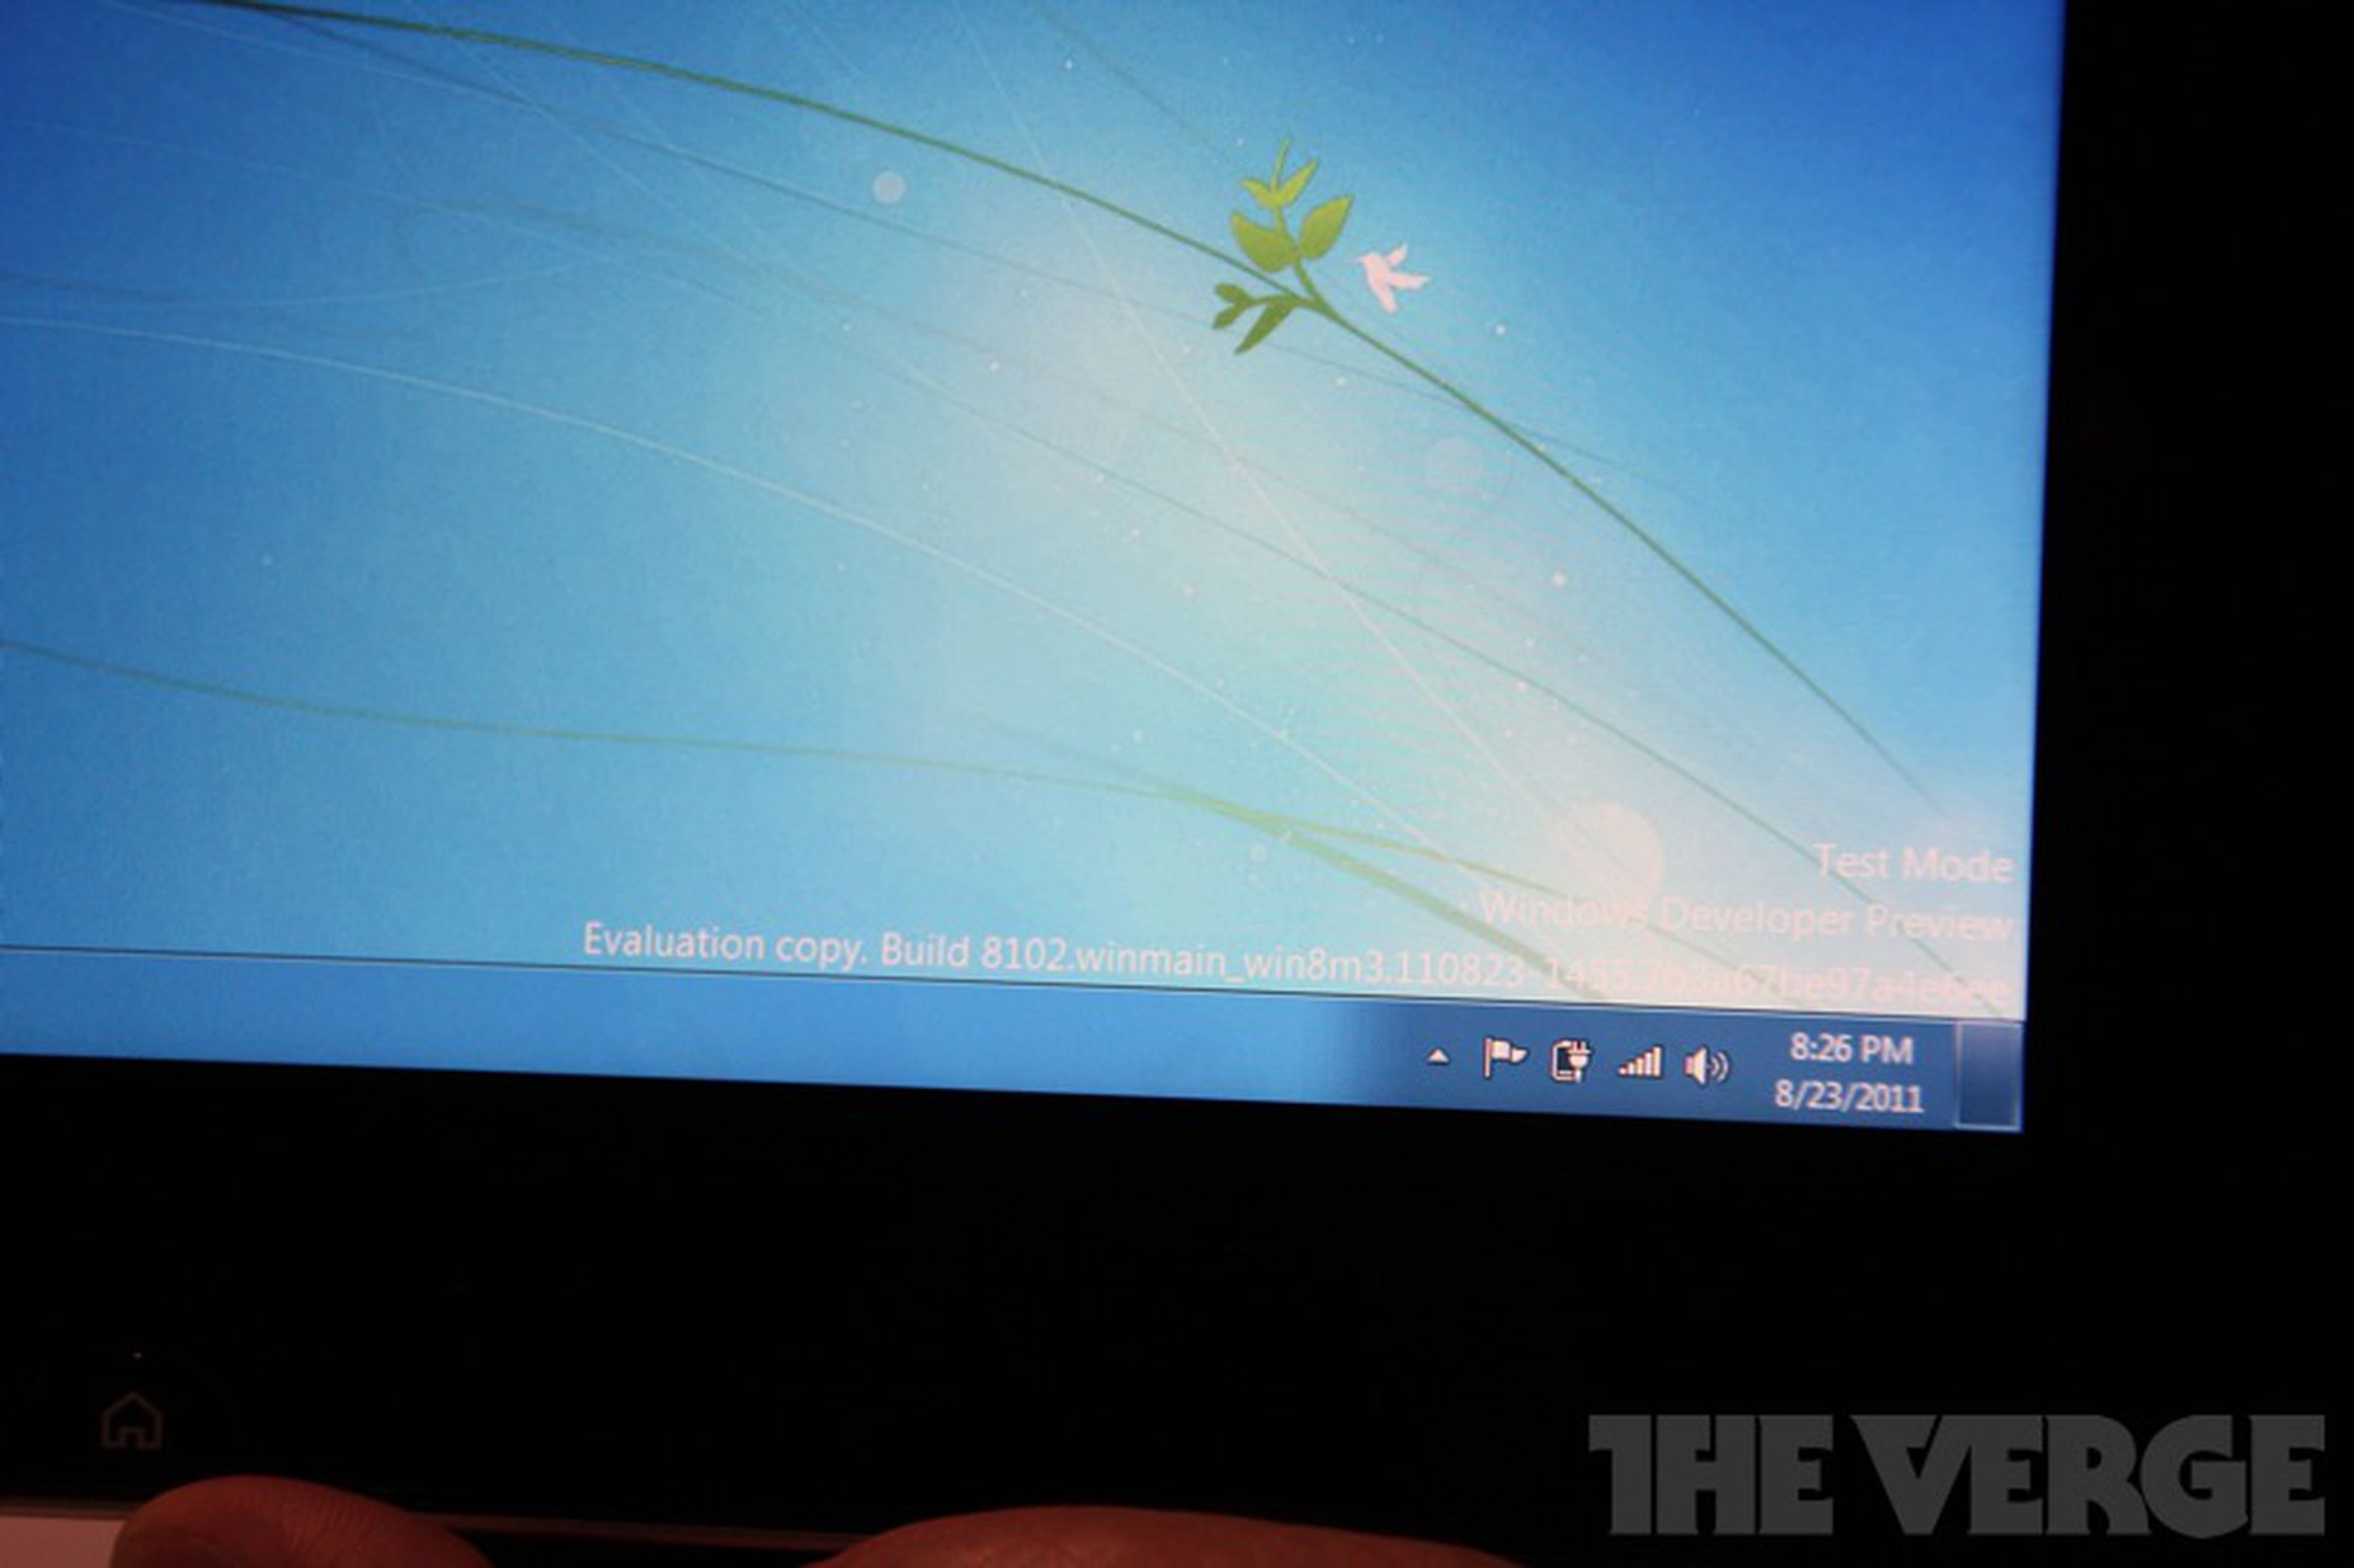 Qualcomm Windows 8 reference design tablet hands-on photos